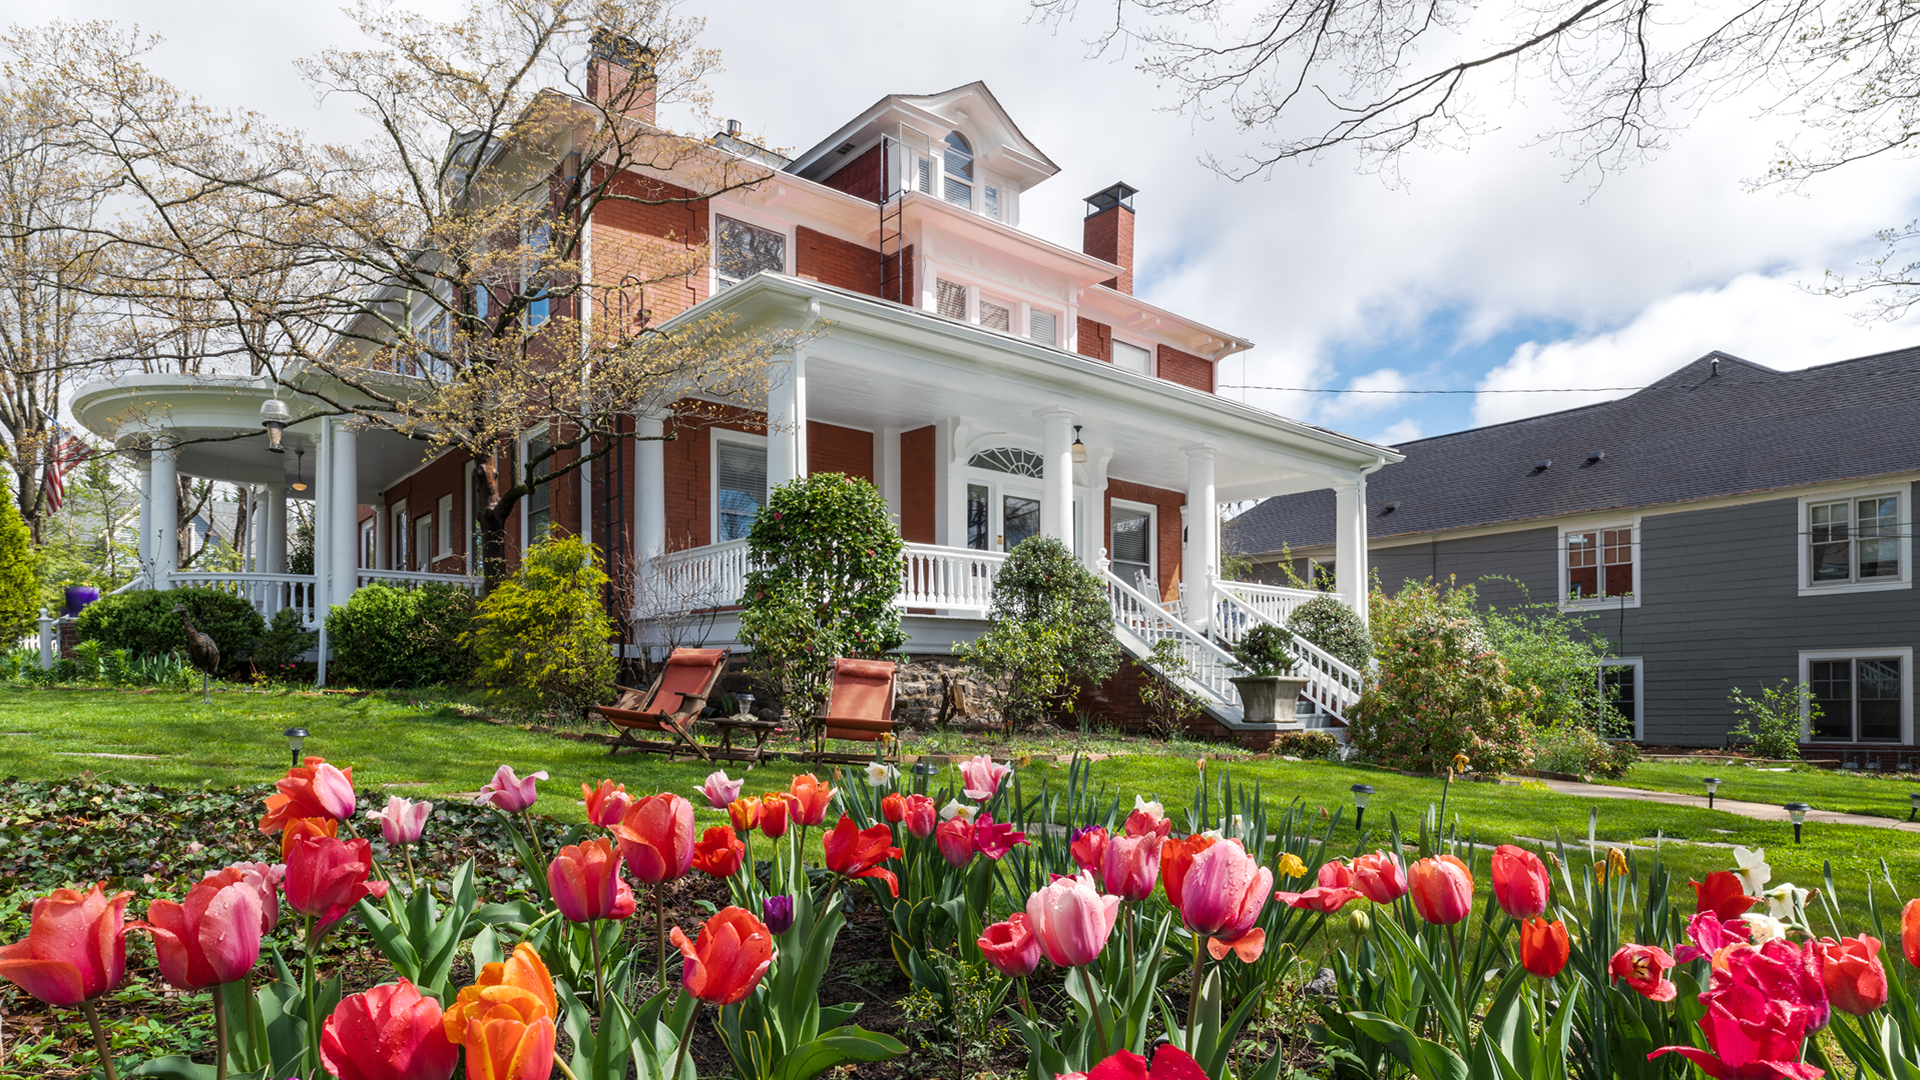 Chestnut Street Inn Red Brick Exterior Two Story with Dormer, White Front and Side Porch with Tulips in foreground